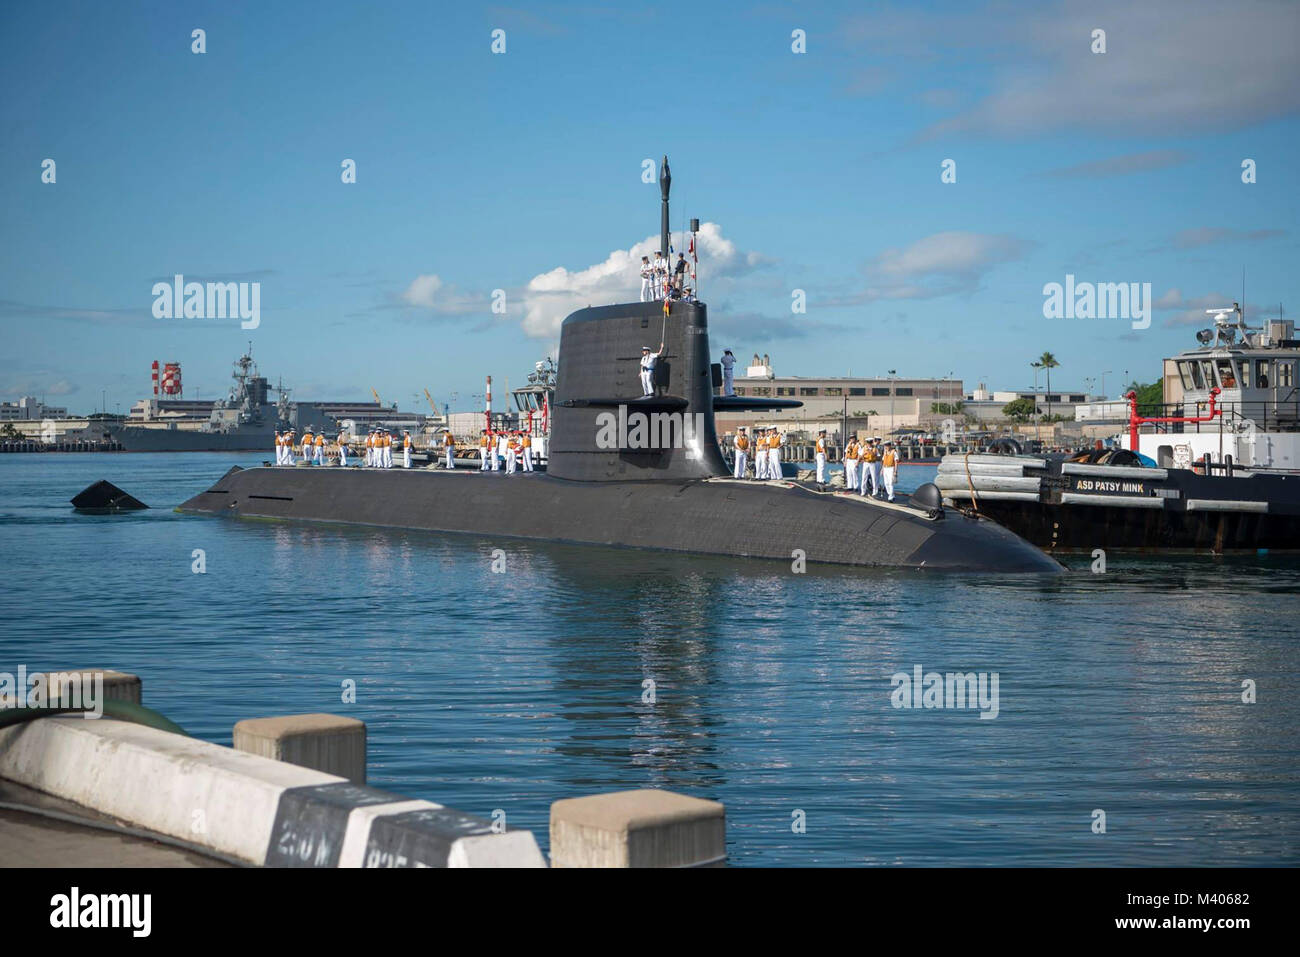 180206-N-LY160-001  PEARL HARBOR (Feb. 6, 2018) The Japan Maritime Self-Defense Force (JMSDF) submarine JS Hakuryu (SS 503) arrives at the submarine piers of Joint Base Pearl Harbor-Hickam to conduct various training evolutions, continue to build positive relationships with the United States, and have the opportunity to enjoy the sights and culture of Hawaii. (US Navy photo by Mass Communications Specialist 2nd Class Michael Lee/released) Stock Photo